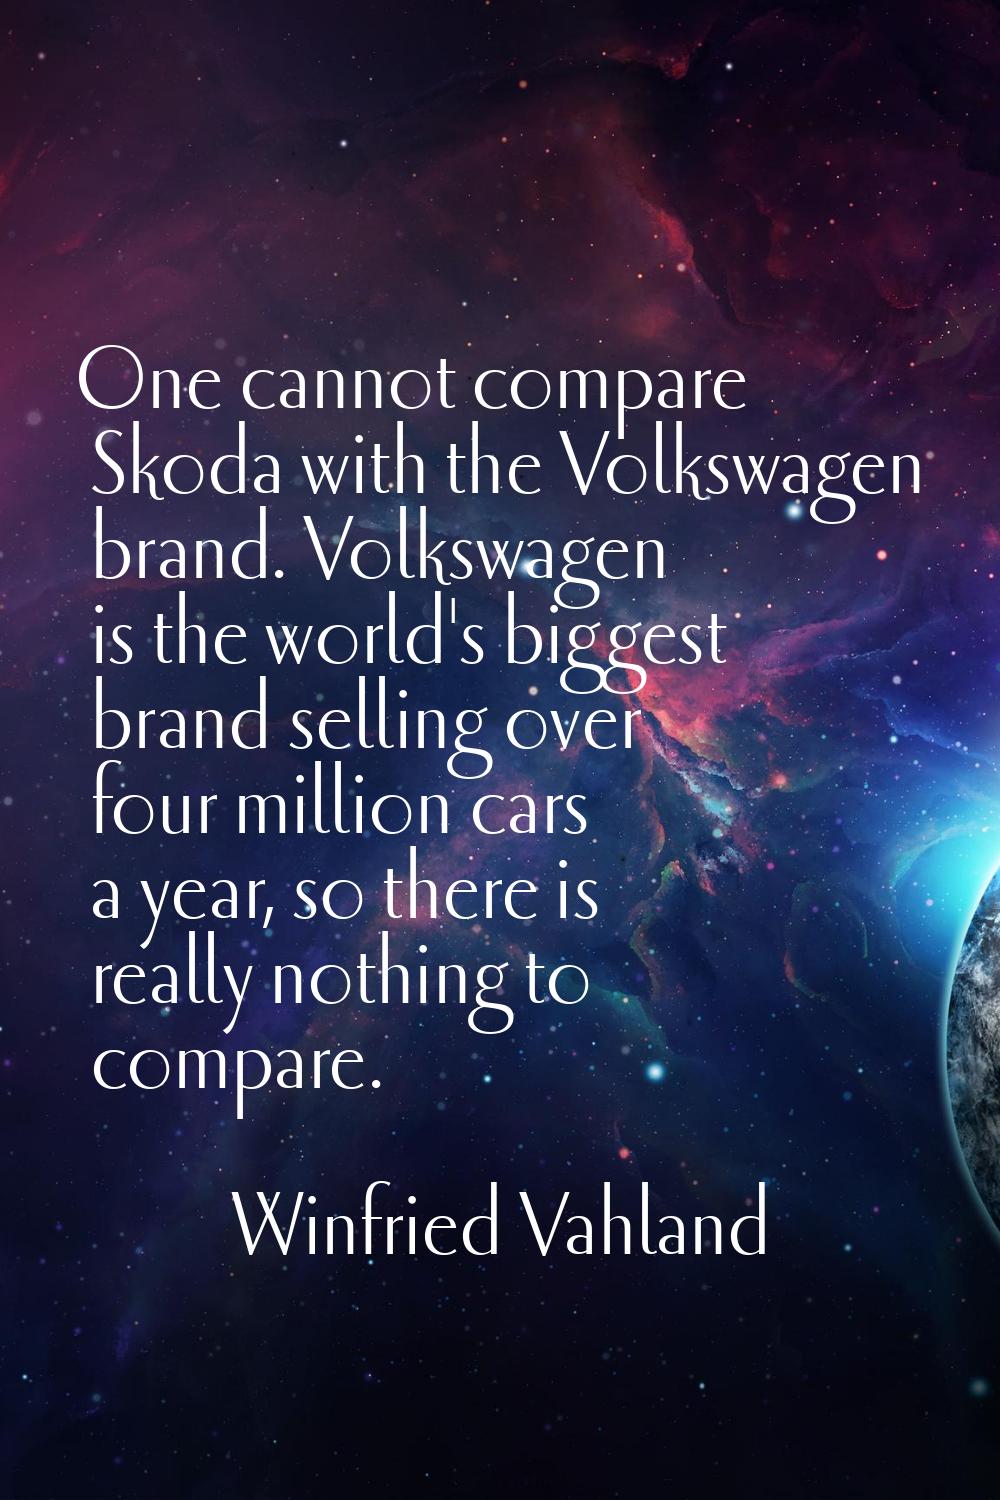 One cannot compare Skoda with the Volkswagen brand. Volkswagen is the world's biggest brand selling